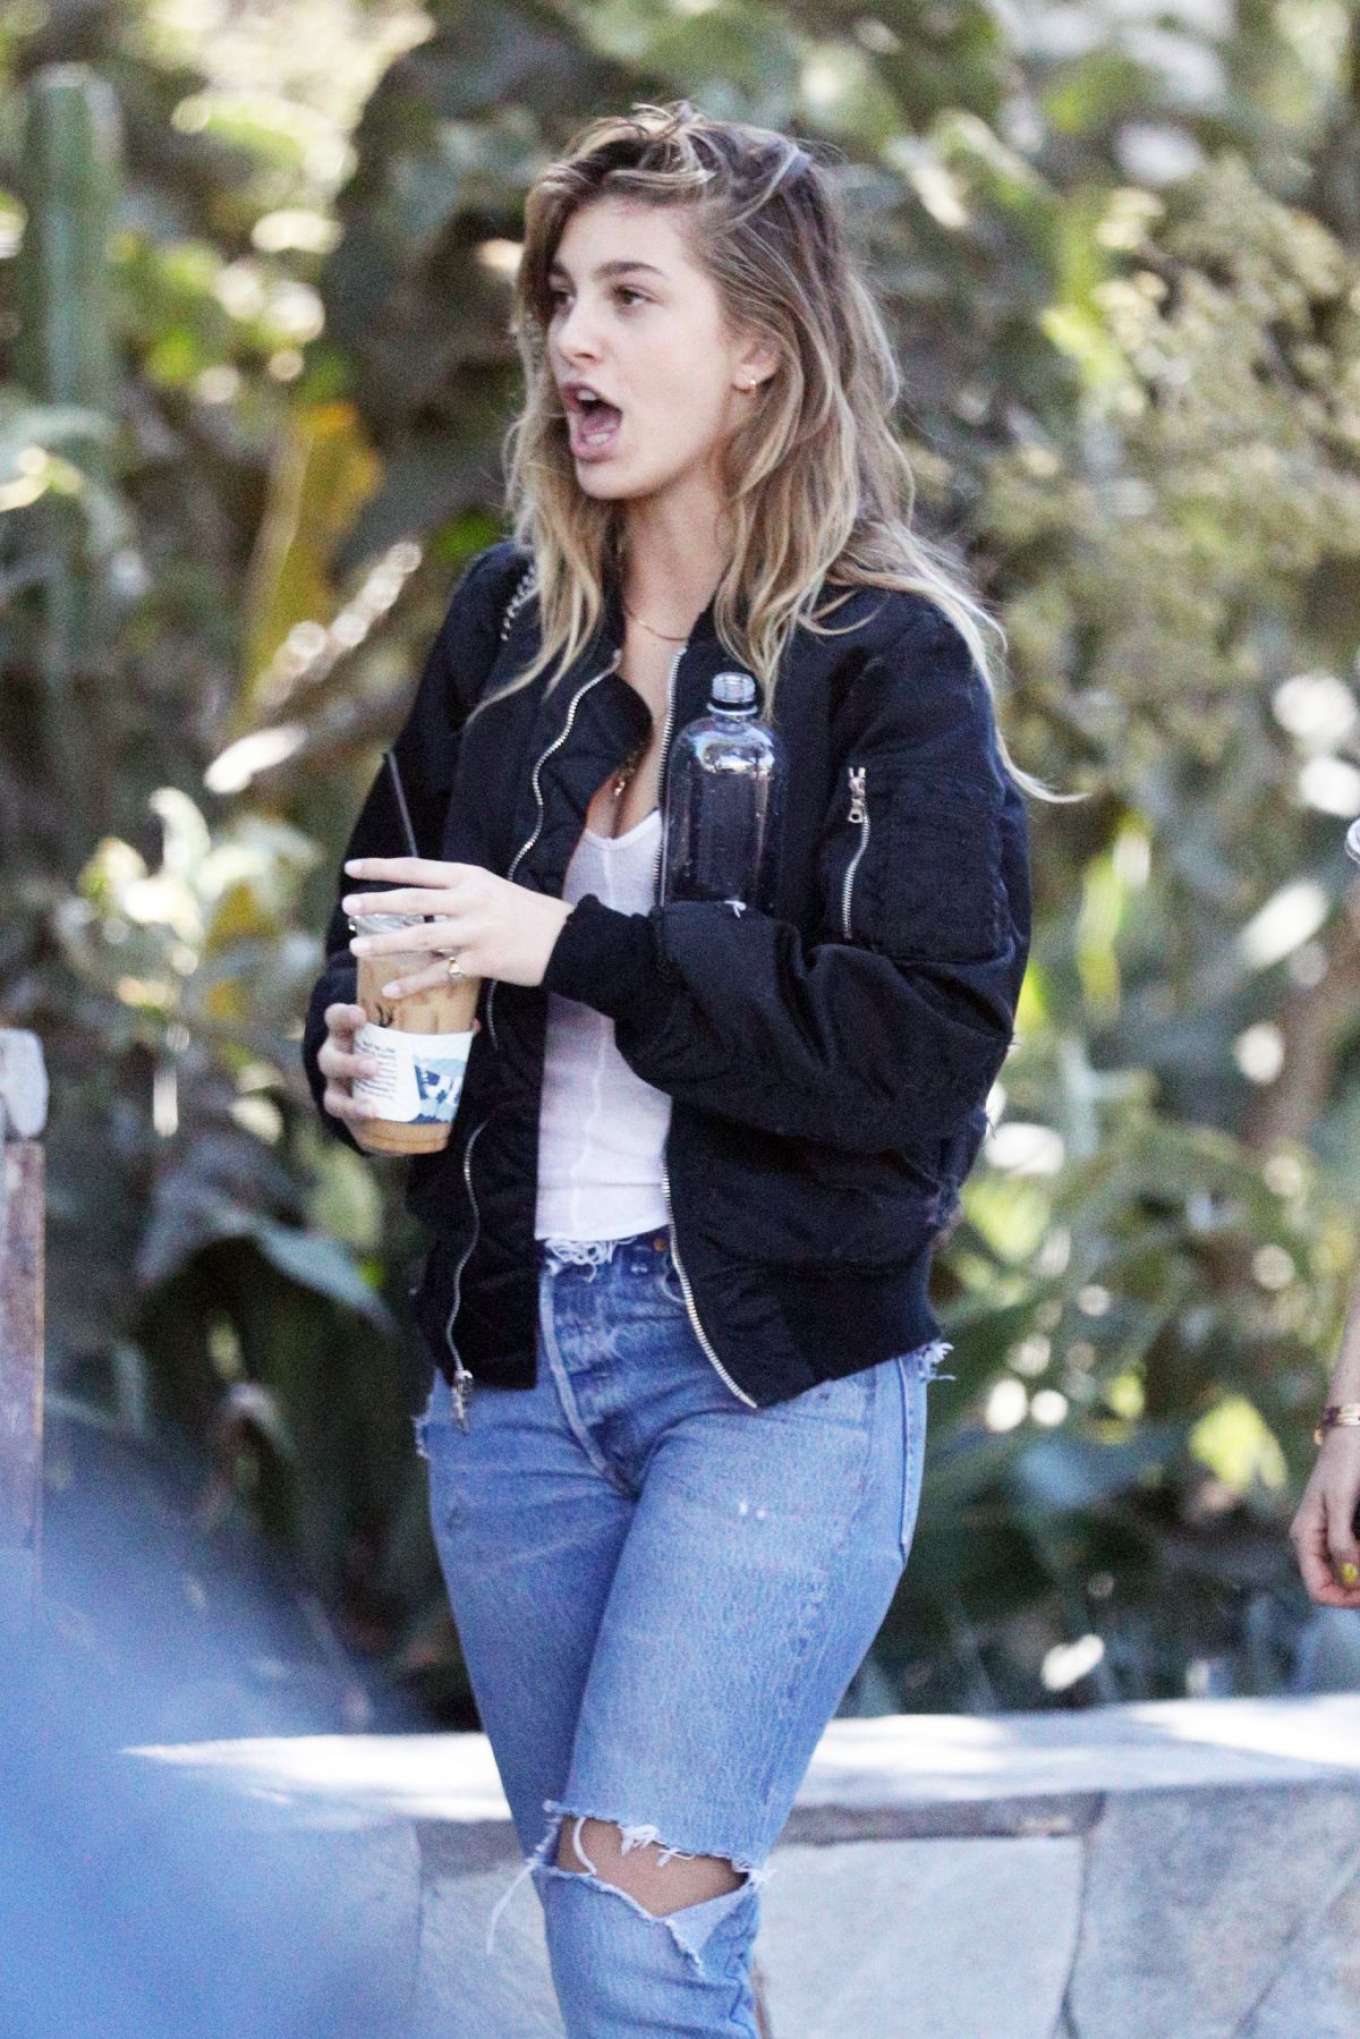 Camila Morrone in Jeans at a Park in Los Angeles – GotCeleb